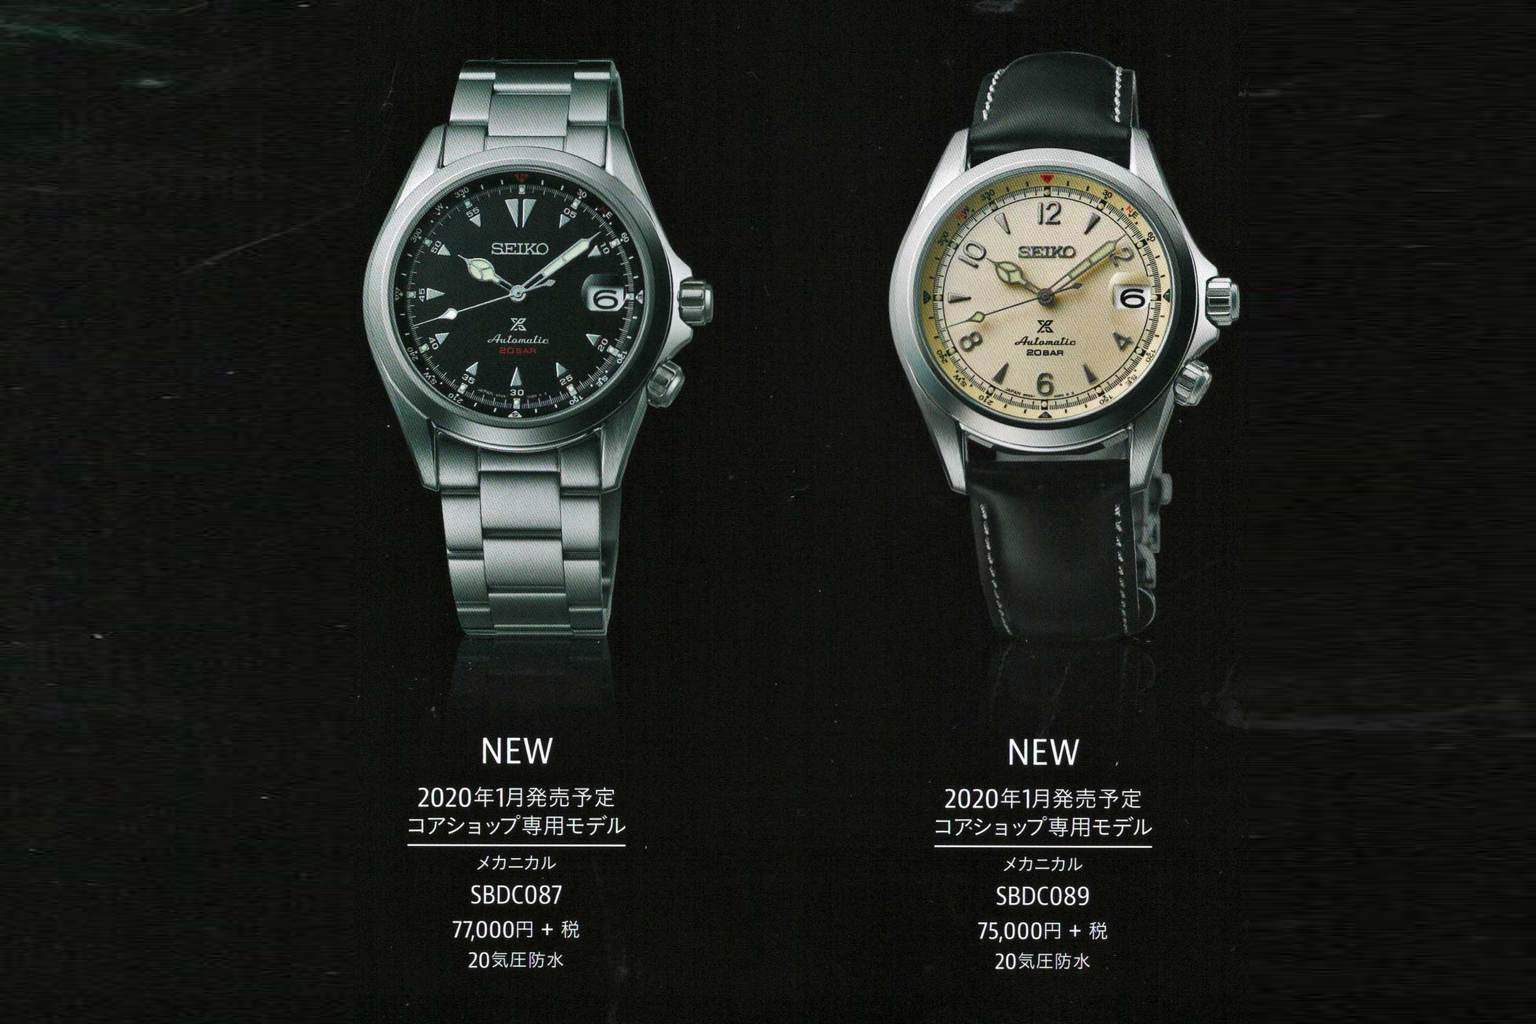 The Return of the Seiko Alpinist (in Green) Appears Imminent - Worn & Wound